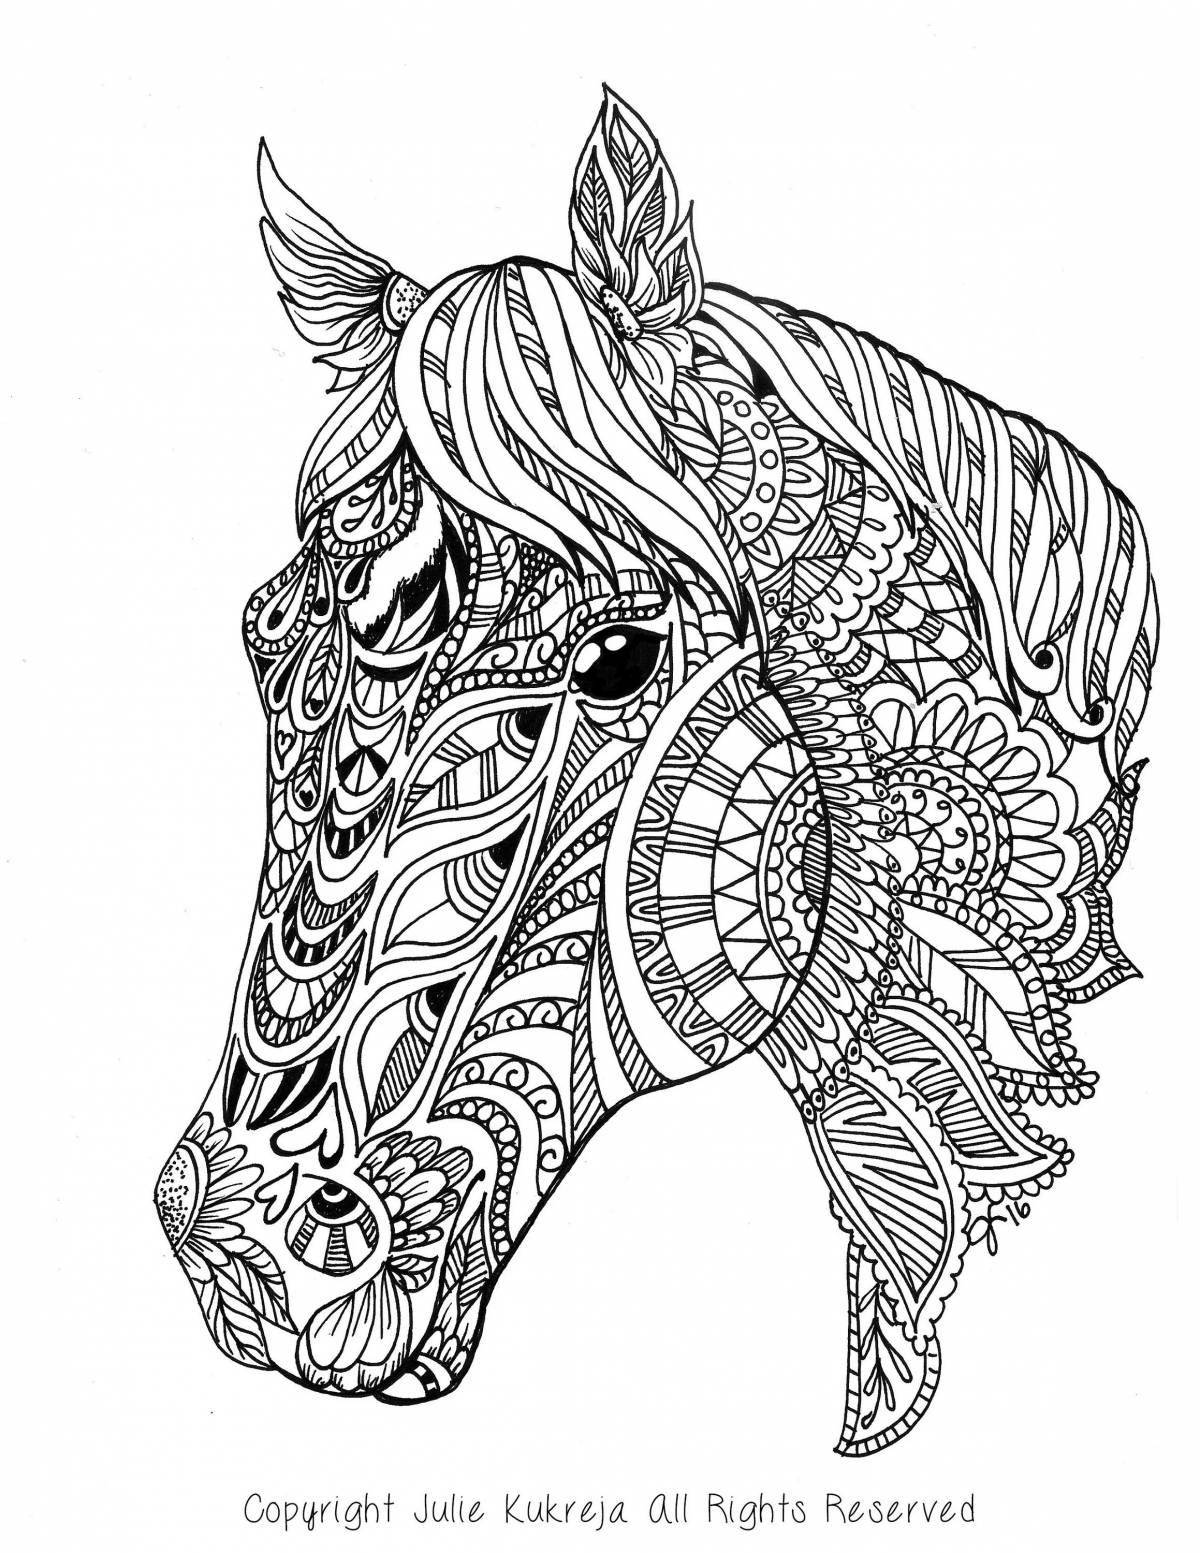 Incredible animal coloring pages